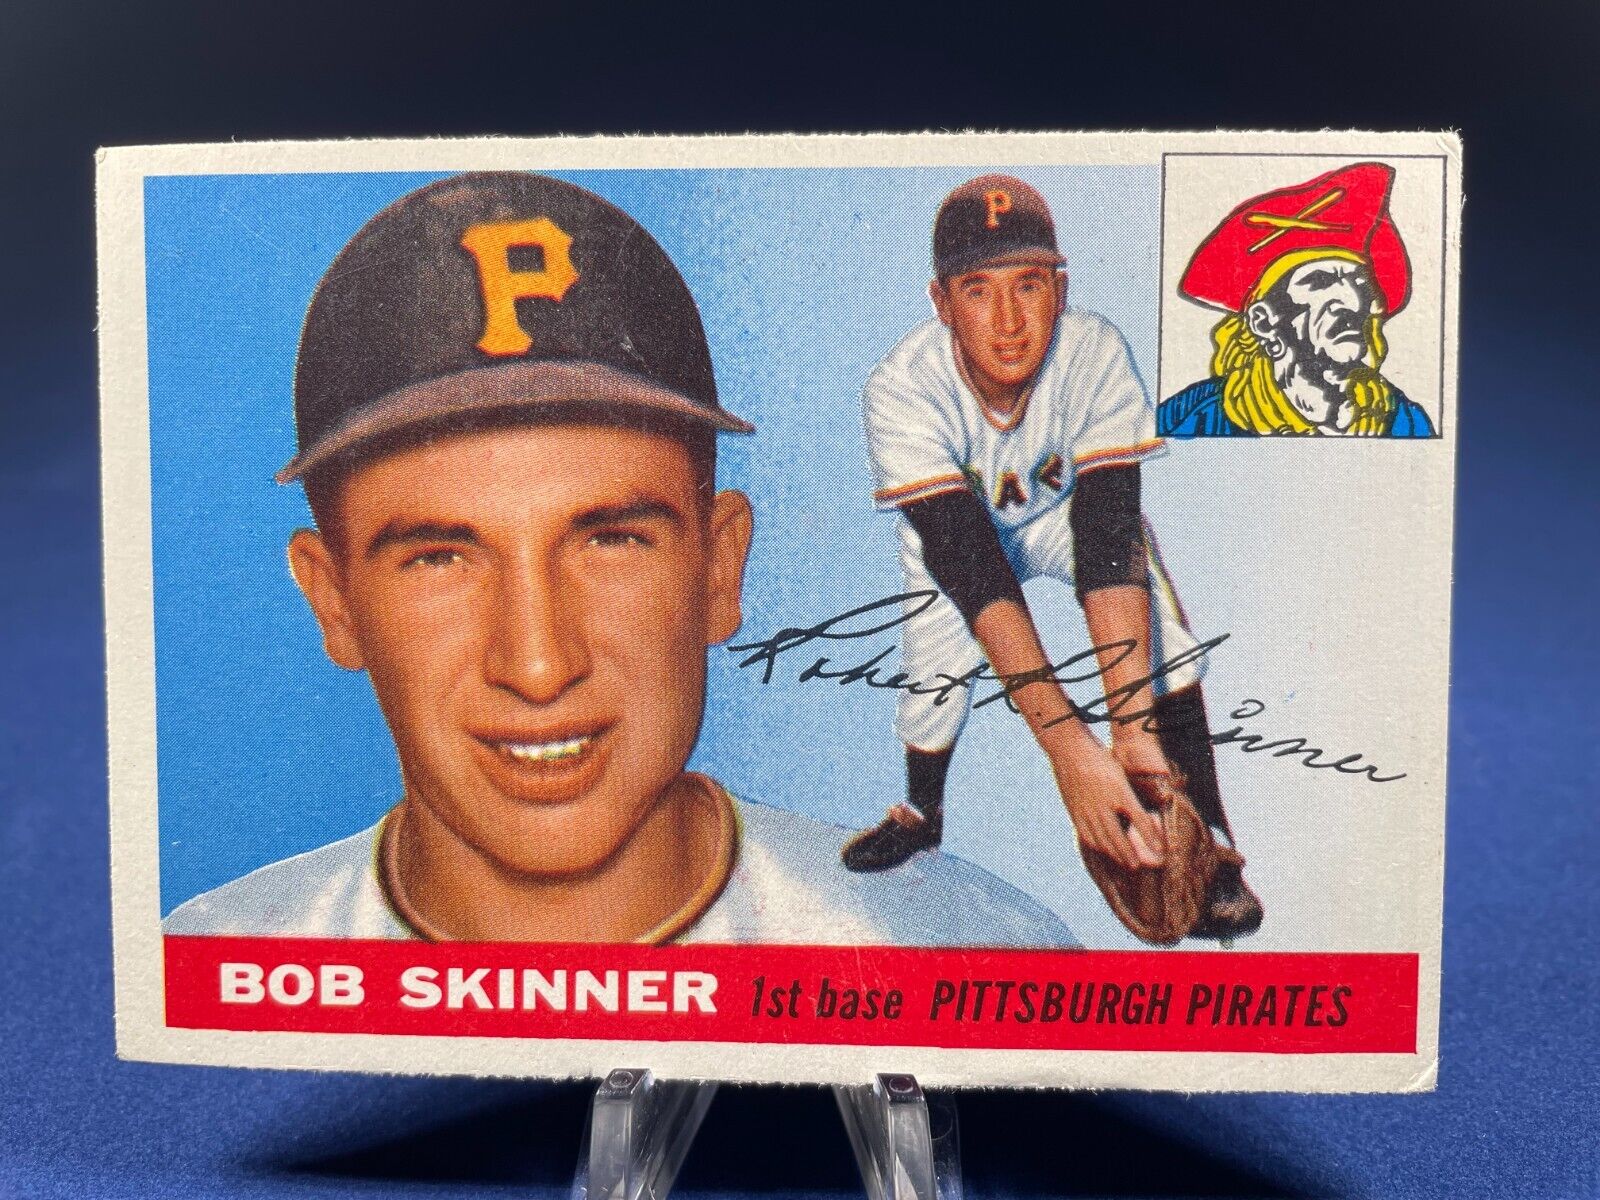 1955 Topps Baseball Card Bob Skinner #88 Rookie Pittsburgh Pirates. rookie card picture